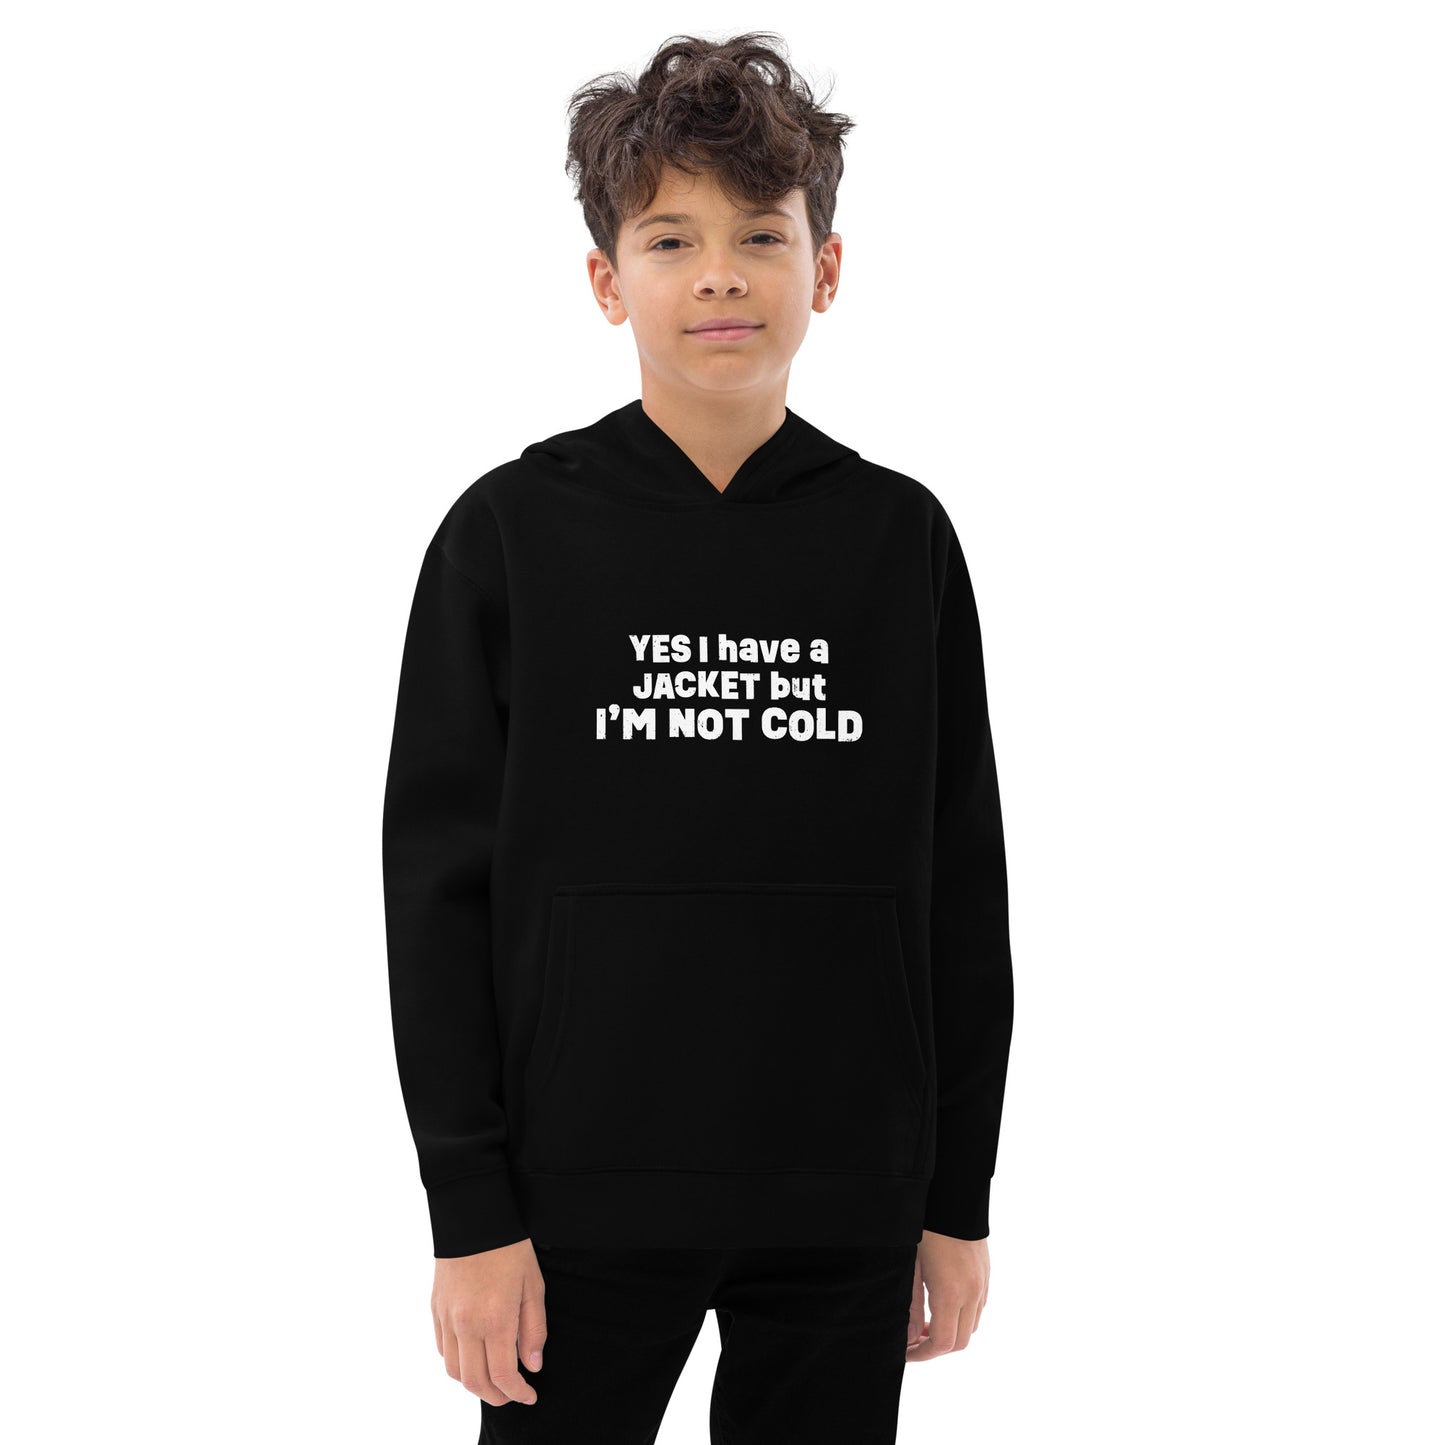 I'm Not Cold hoodie (kids sizes)